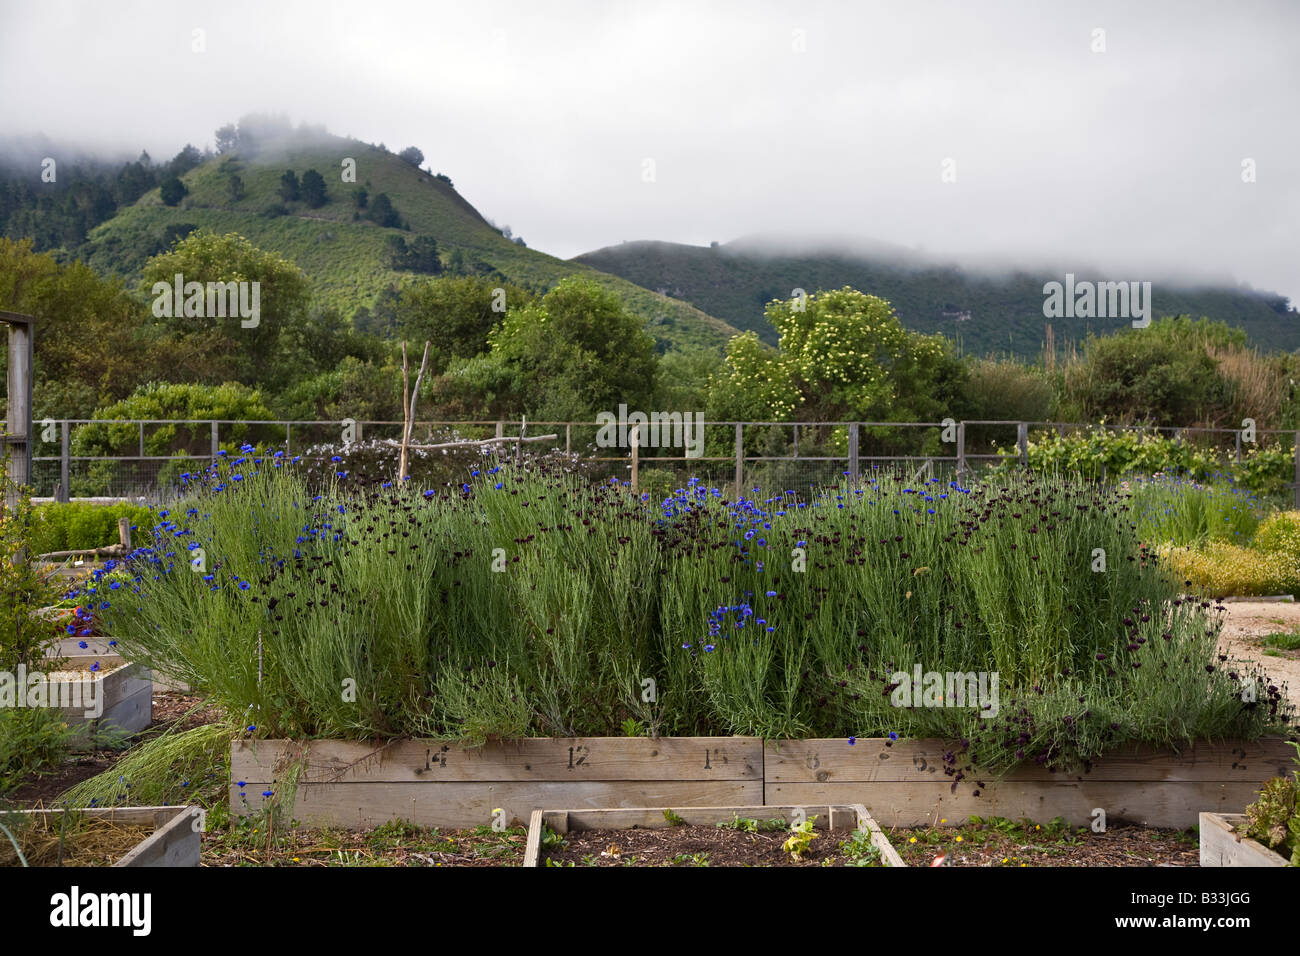 An ORGANIC GARDEN grows flowers such as BACHELOR BUTTONS and vegetables at the HILTON BIALEK HABITAT CARMEL VALLEY CALIFORNIA Stock Photo